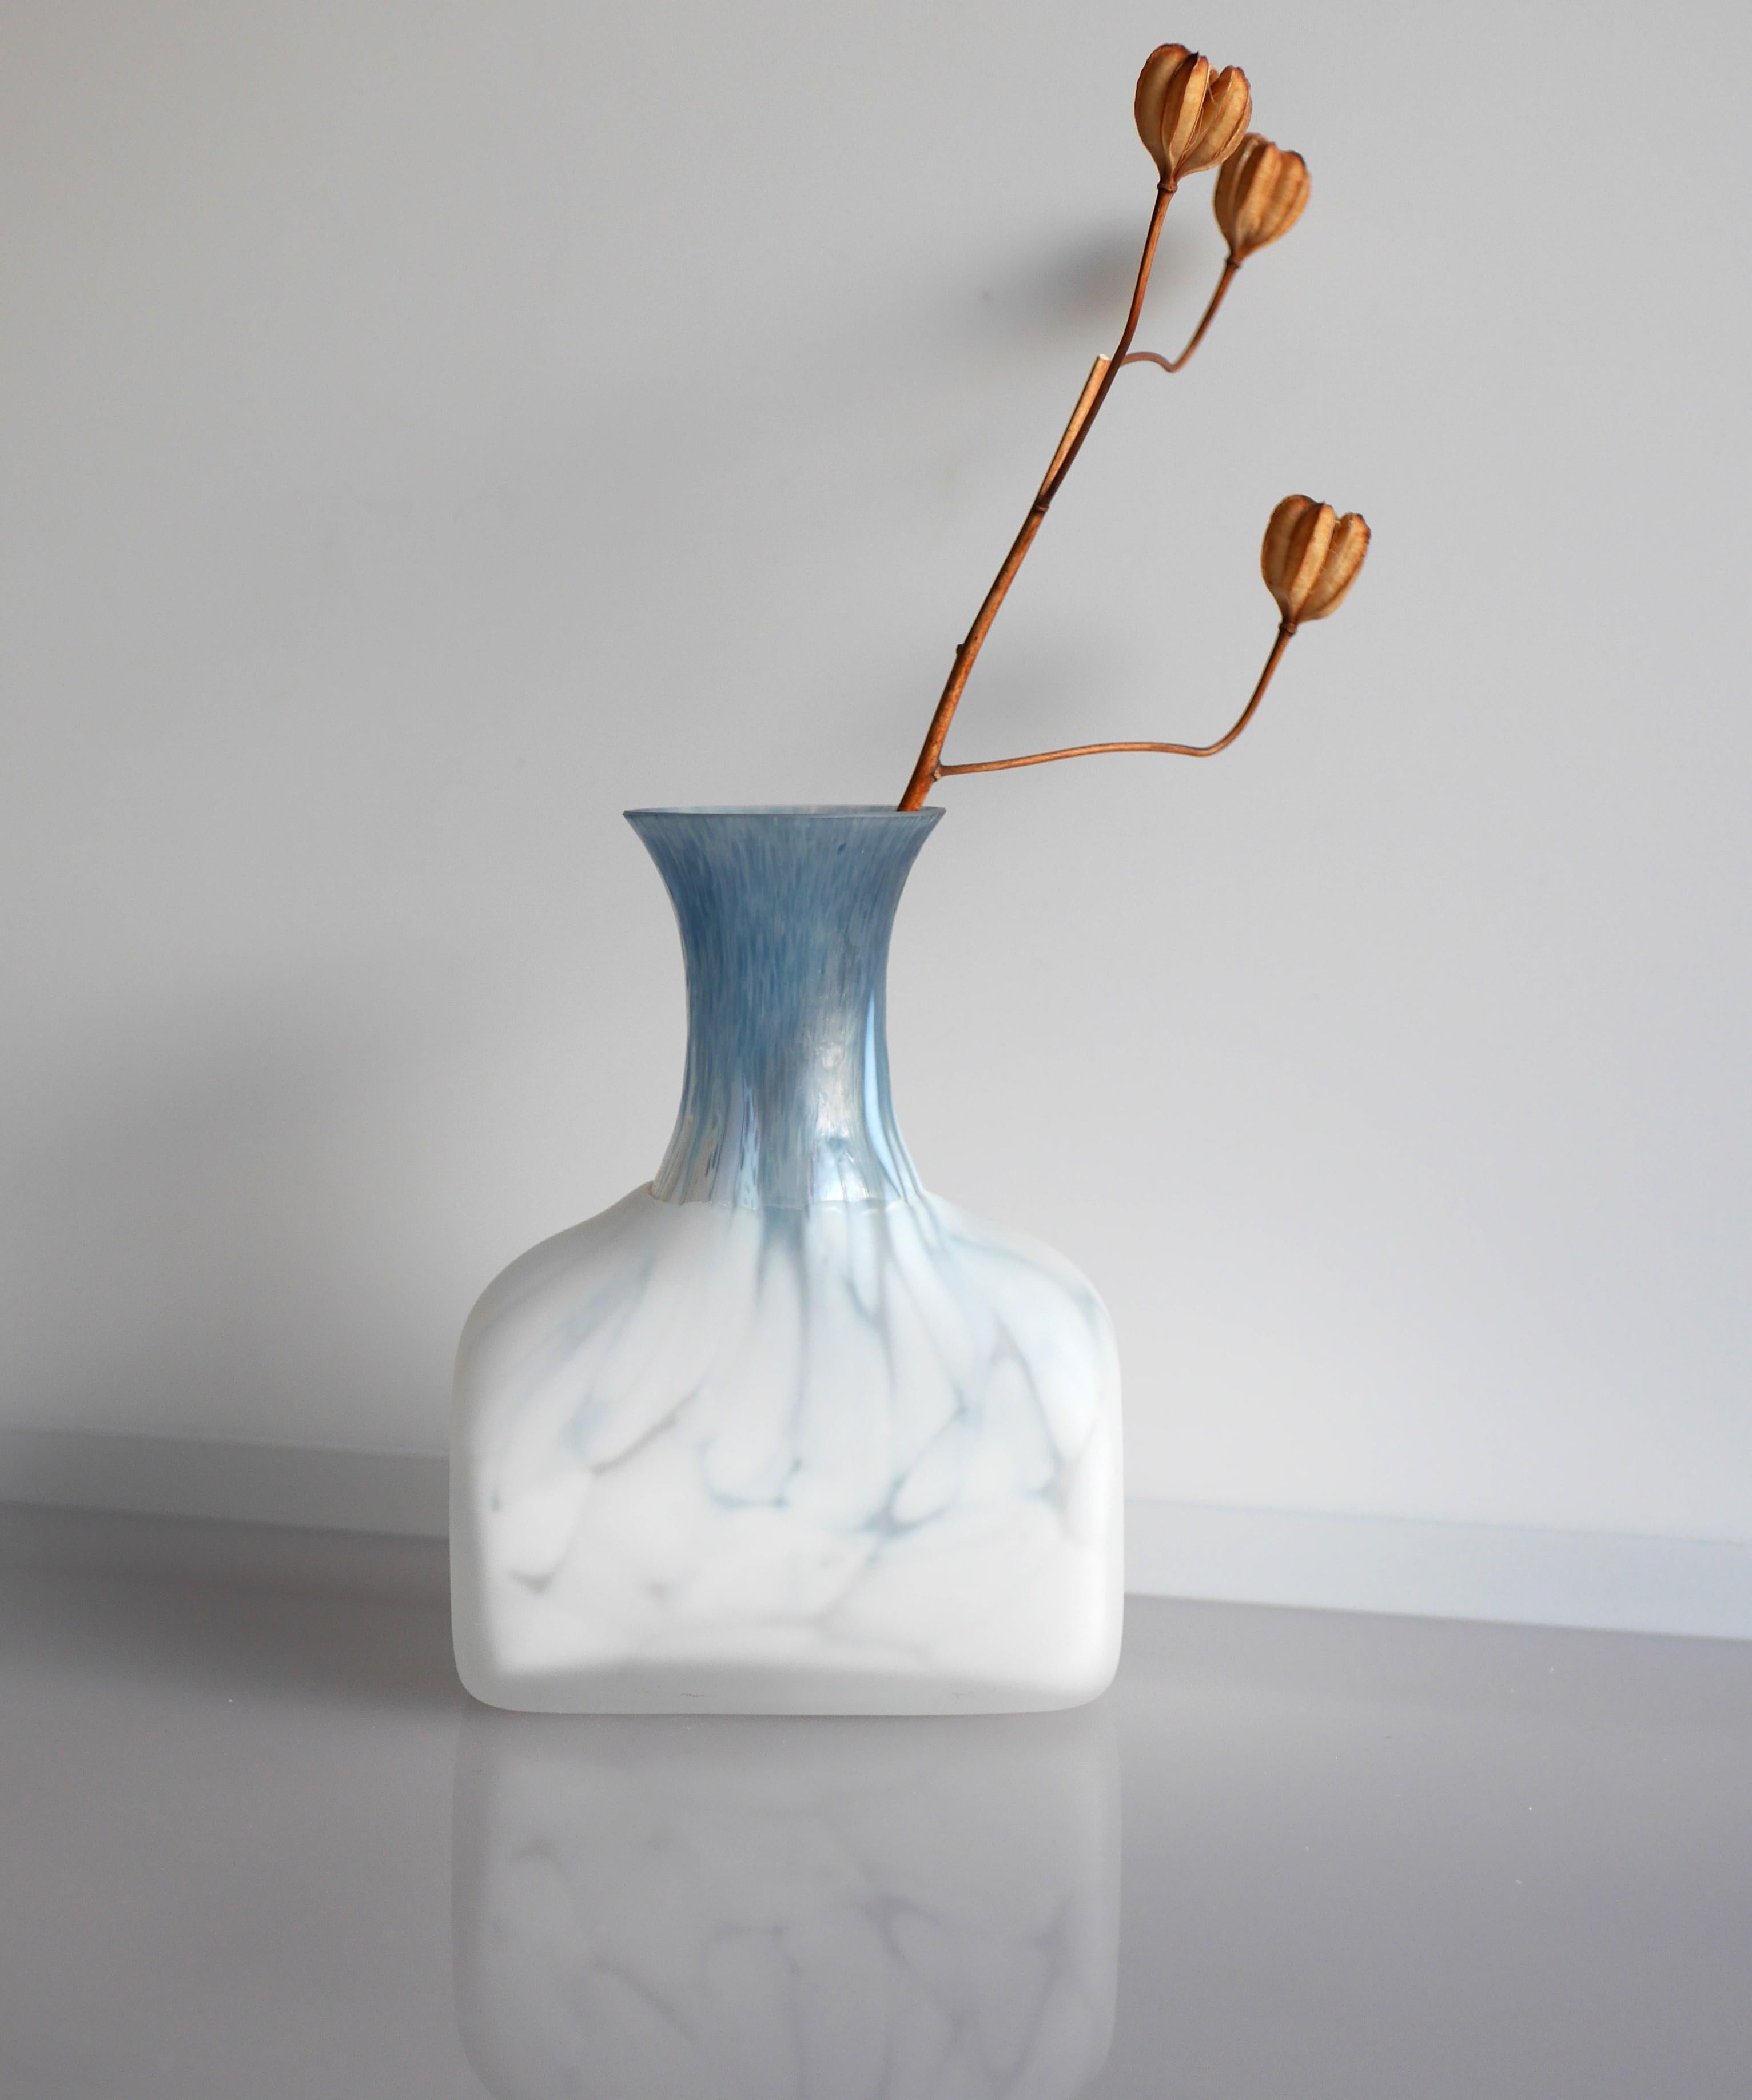 An amazing vintage cased glass vase handmade art glass, design by Monica Backström for Kosta Boda, Sweden. This is a very beautiful vase, it has a very special feeling to it, the neck has a thin layer of various shades of pale blue glass which